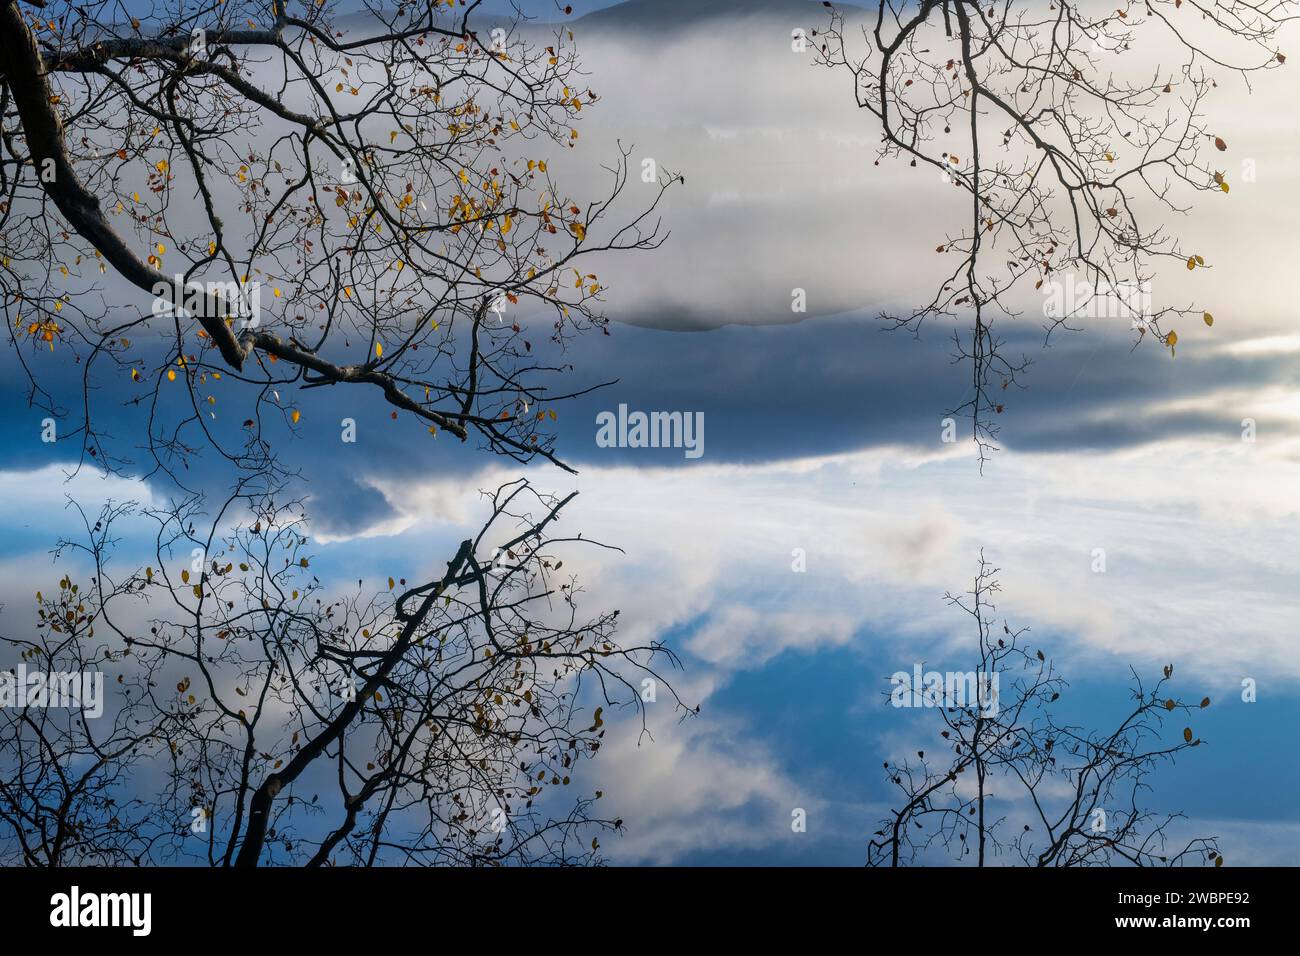 Birch tree branches and clouds reflecting in a loch. Highlands, Scotland Stock Photo